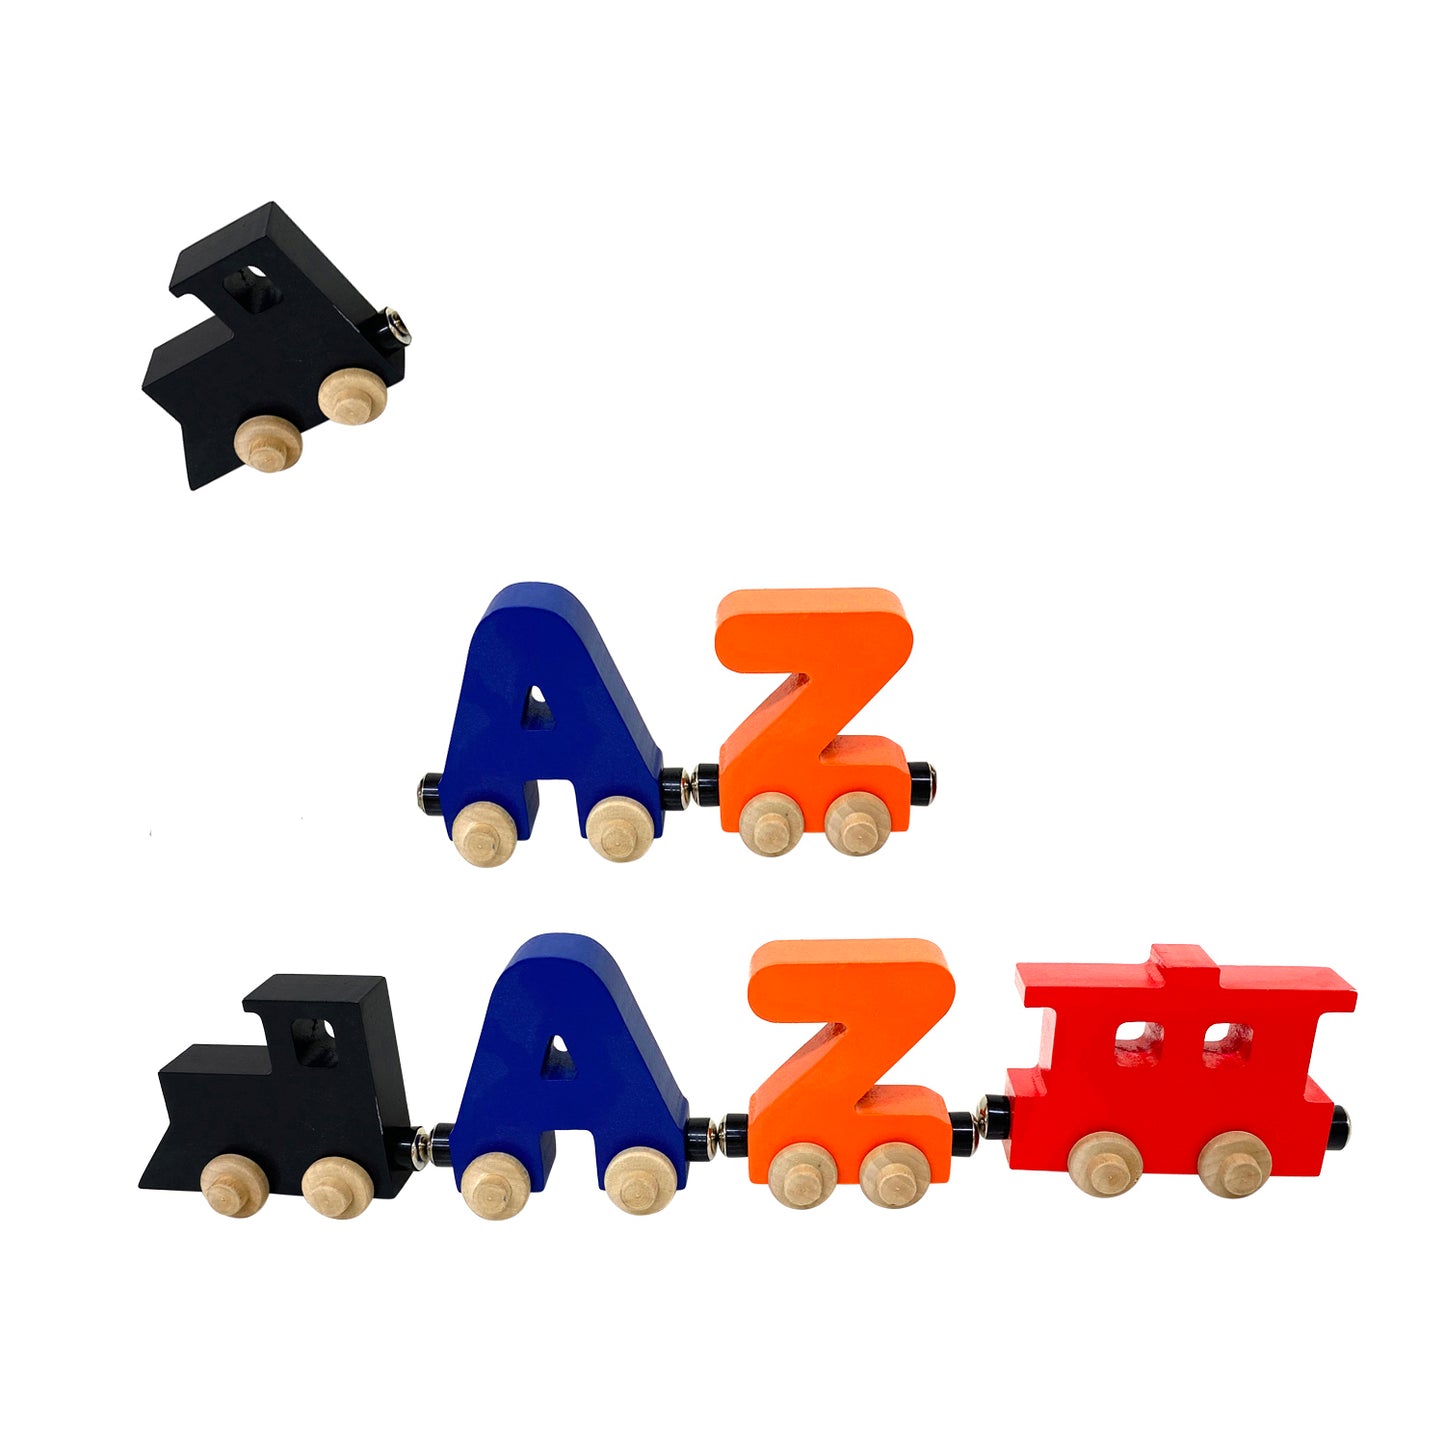 2 Letter Train Wooden Perosnalized Name Letters Includes Train & Wagon Letters Puzzle Includes Train & Wagon Free